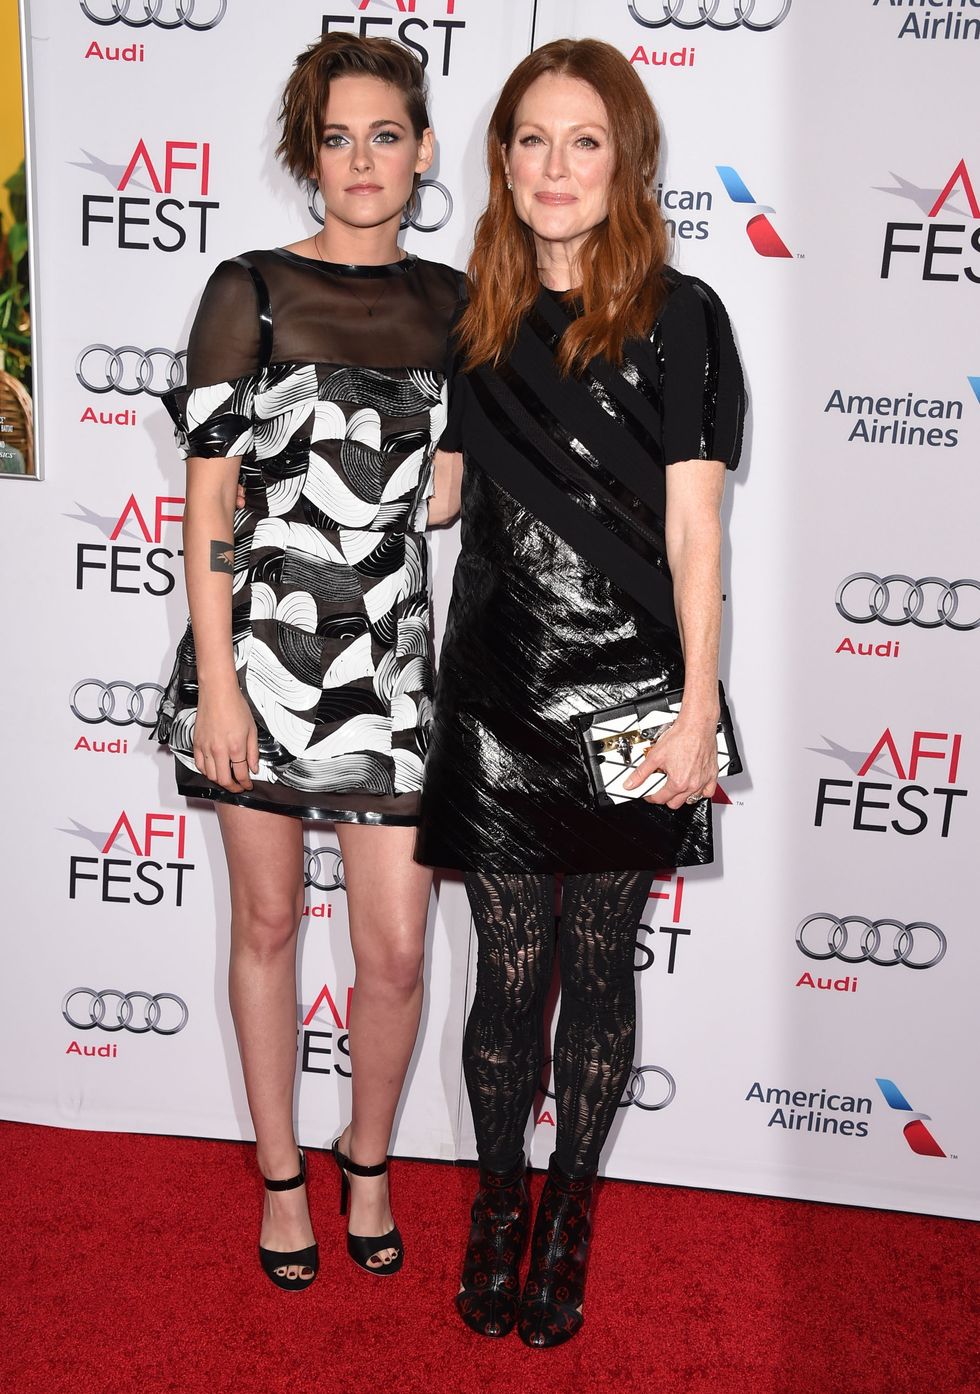 Kristen Stewart and Julianne Moore on the red carpet at a Still Alive screening